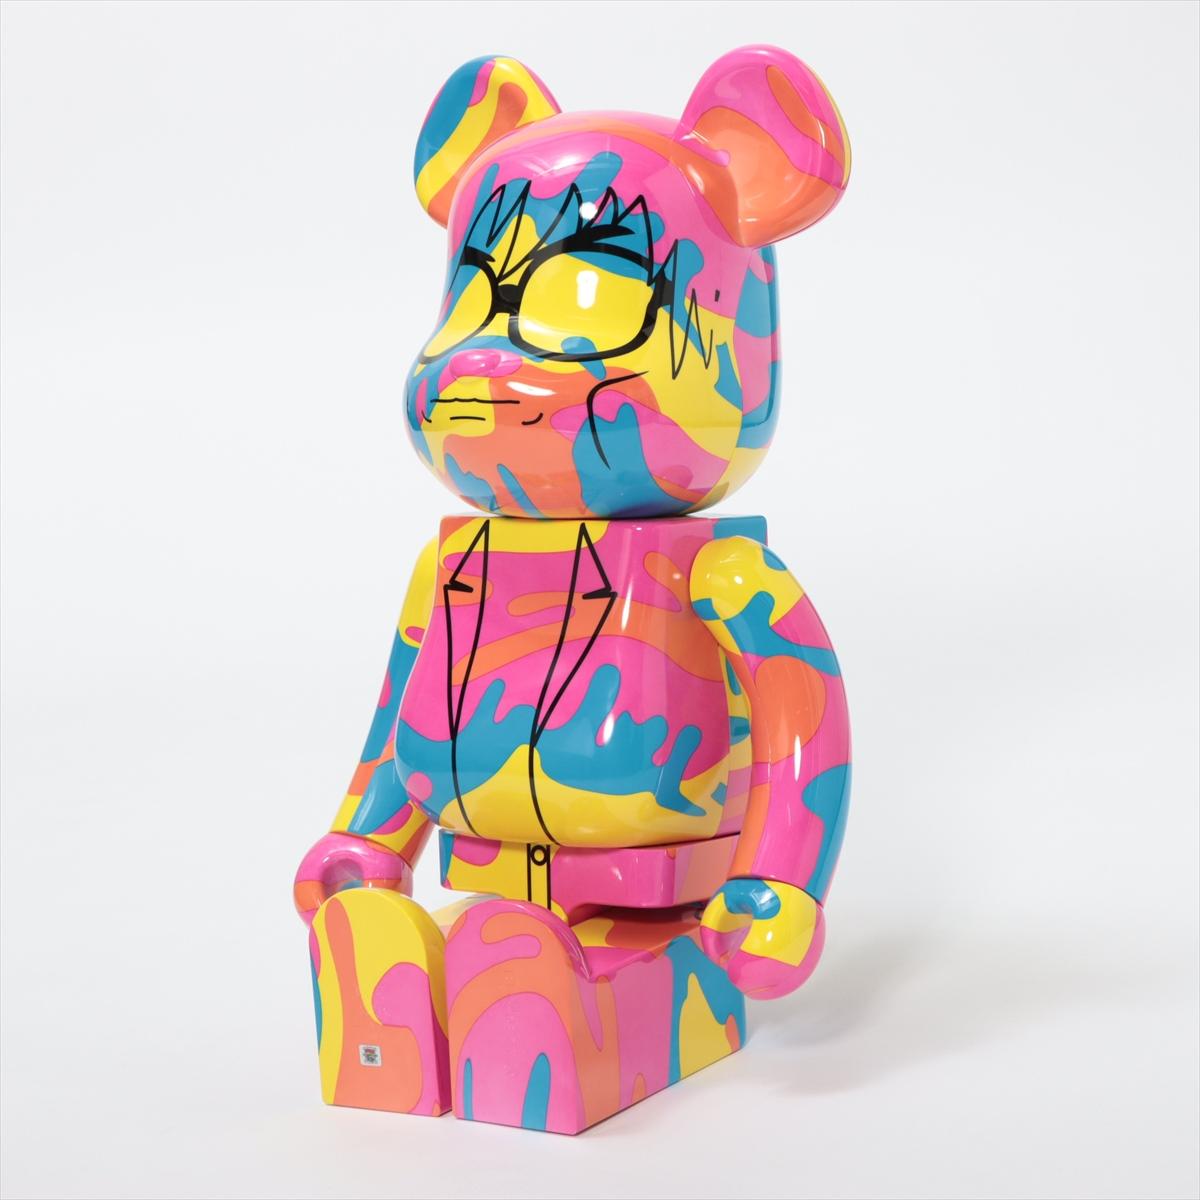 The Bearbrick Andy Warhol Special Multicolor is a playful and stylish collectible toy that merges contemporary design with a touch of whimsy. Featuring a vibrant array of colors, the Bearbrick figurine stands out with its bold aesthetic. The